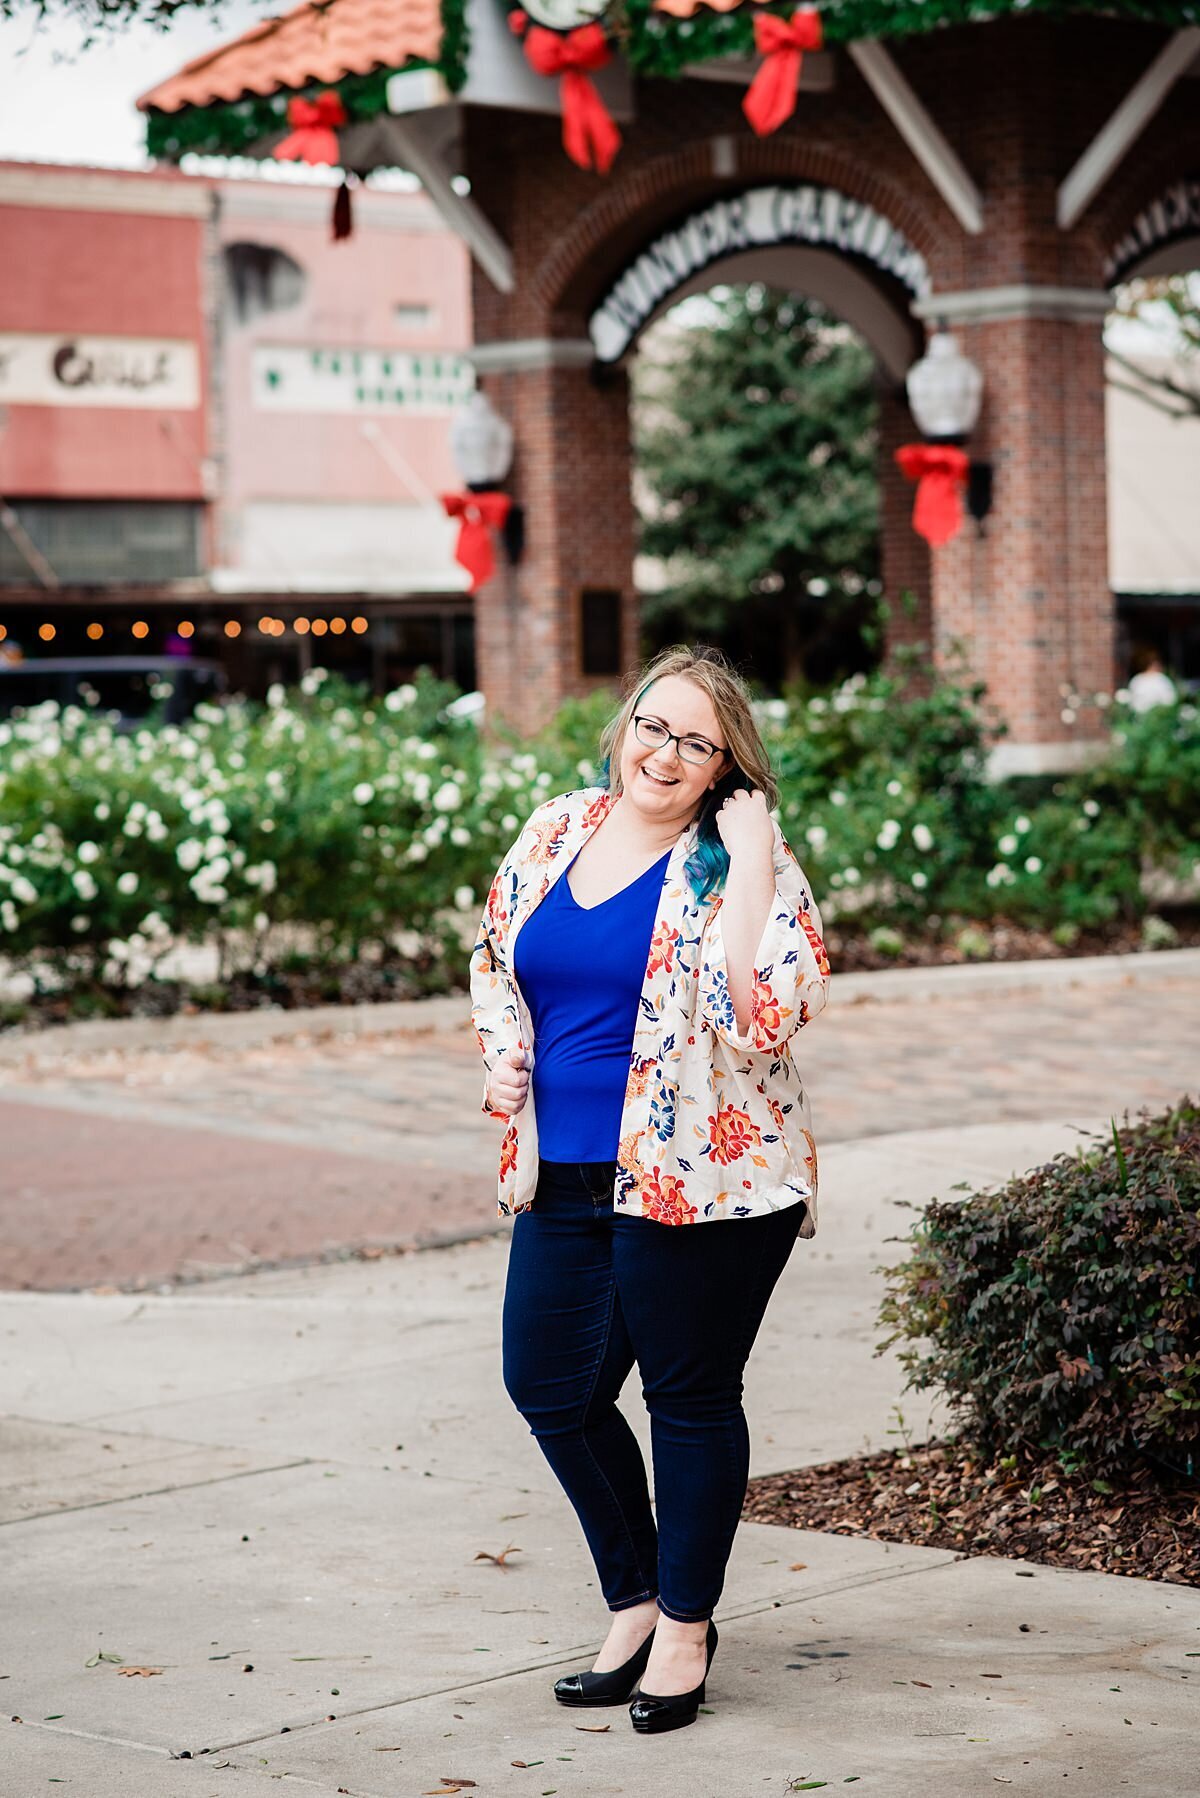 Downtown Winter Garden Village at Christmas, Mahlia wearing a floral shawl